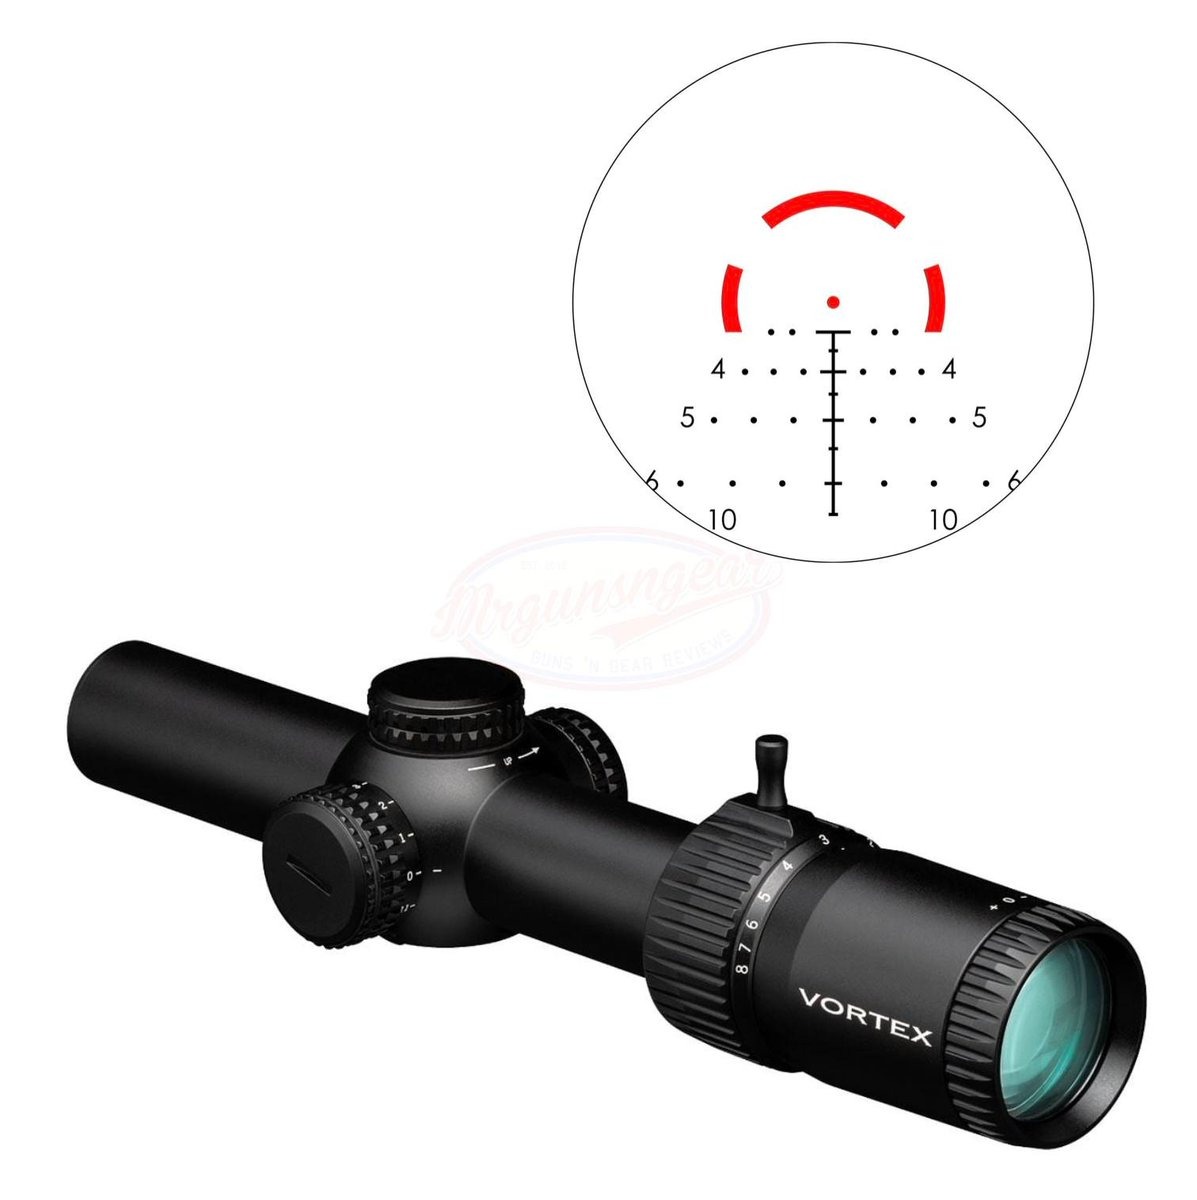 Vortex Optics Gen2 Strike Eagle 1-8x scope with integral throw lever and etched illuminated BDC3 reticle for $219/ea with code 'SE18' currently here: mrgunsngear.org/4boNdQ2 

Cheapest I've seen it by far - in stock as of this post 🔴🦅🚬